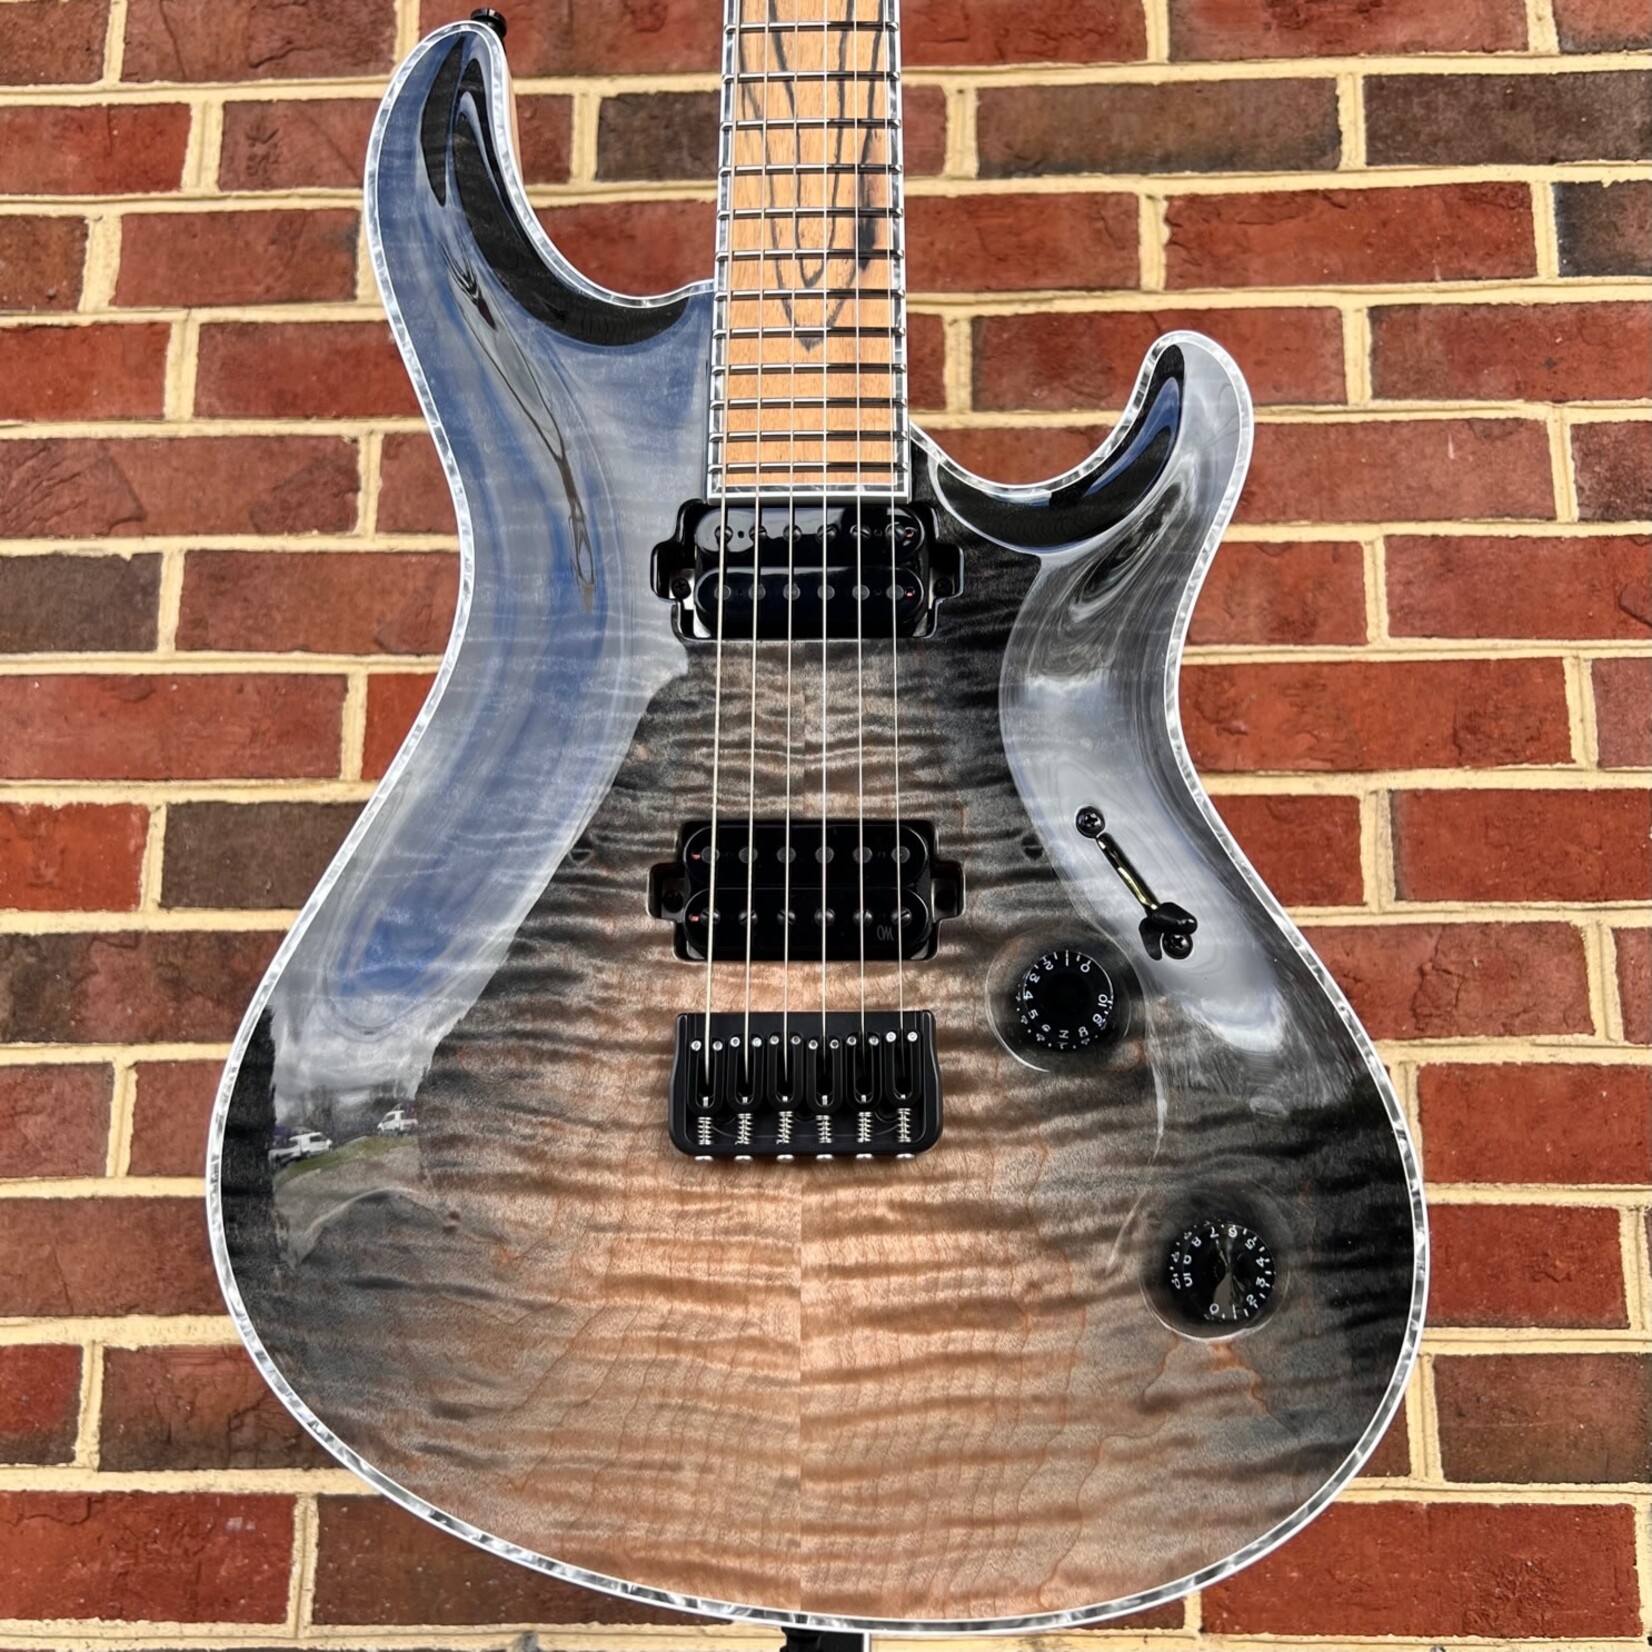 Mayones Mayones Regius Core 6, Custom Color, 4A Quilted Maple Top, Swamp Ash Body, 4A Pale Moon Ebony Fretboard, Exotic I 11ply Neck - Wenge/Mahogany/Purpleheart/Maple, White Binding, Gloss Top/Matte Back, TKO Pickups, Hipshot Bridge & Tuners, Hardshell Case